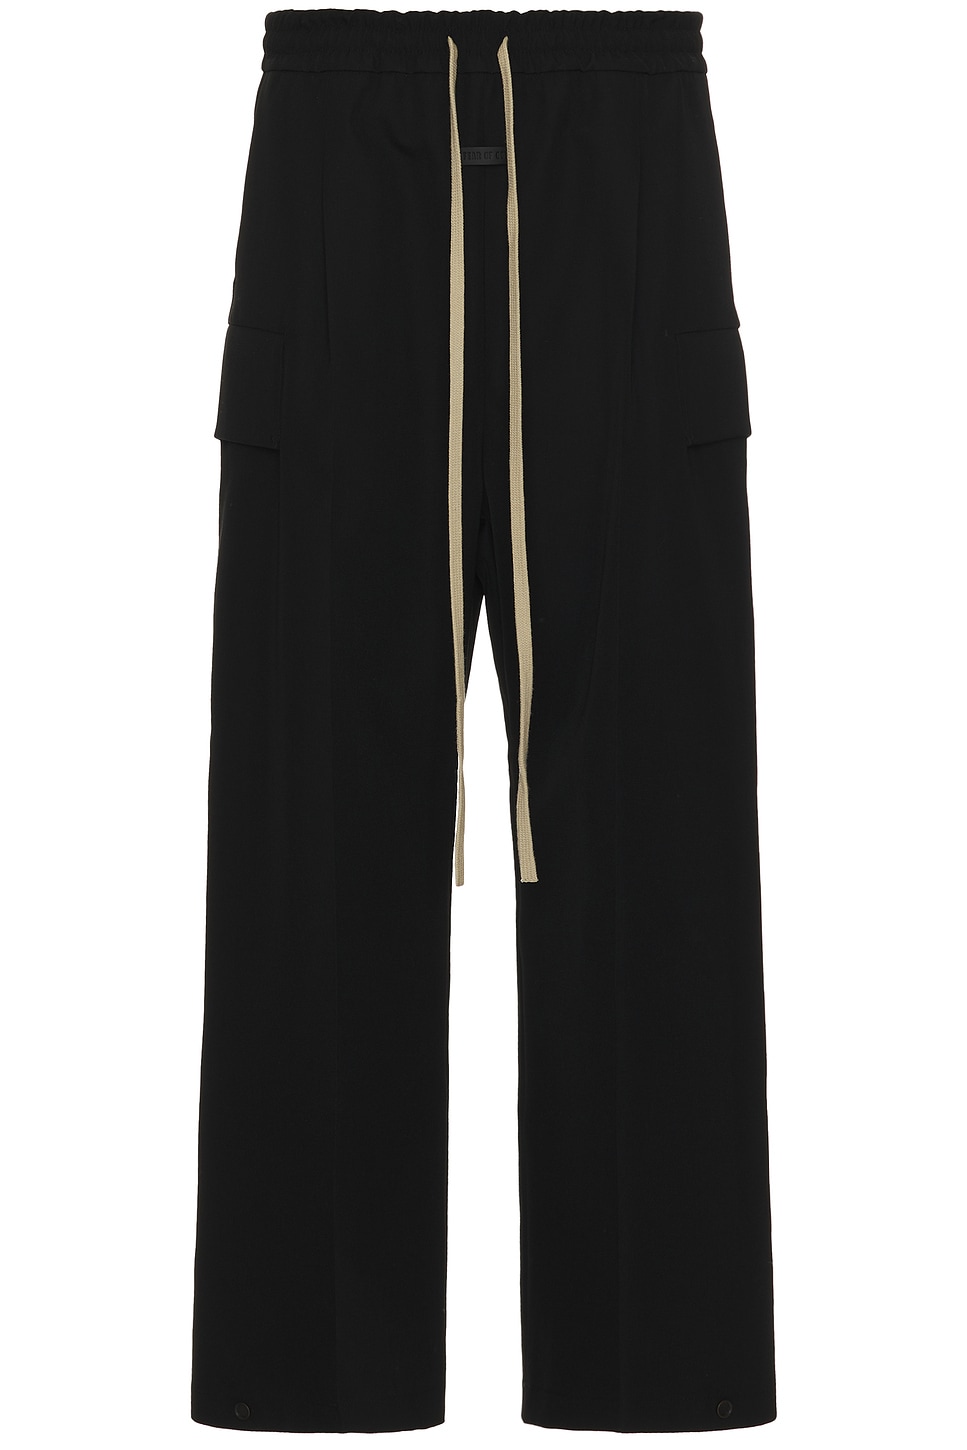 Image 1 of Fear of God Wool Cotton Cargo Pant in Black